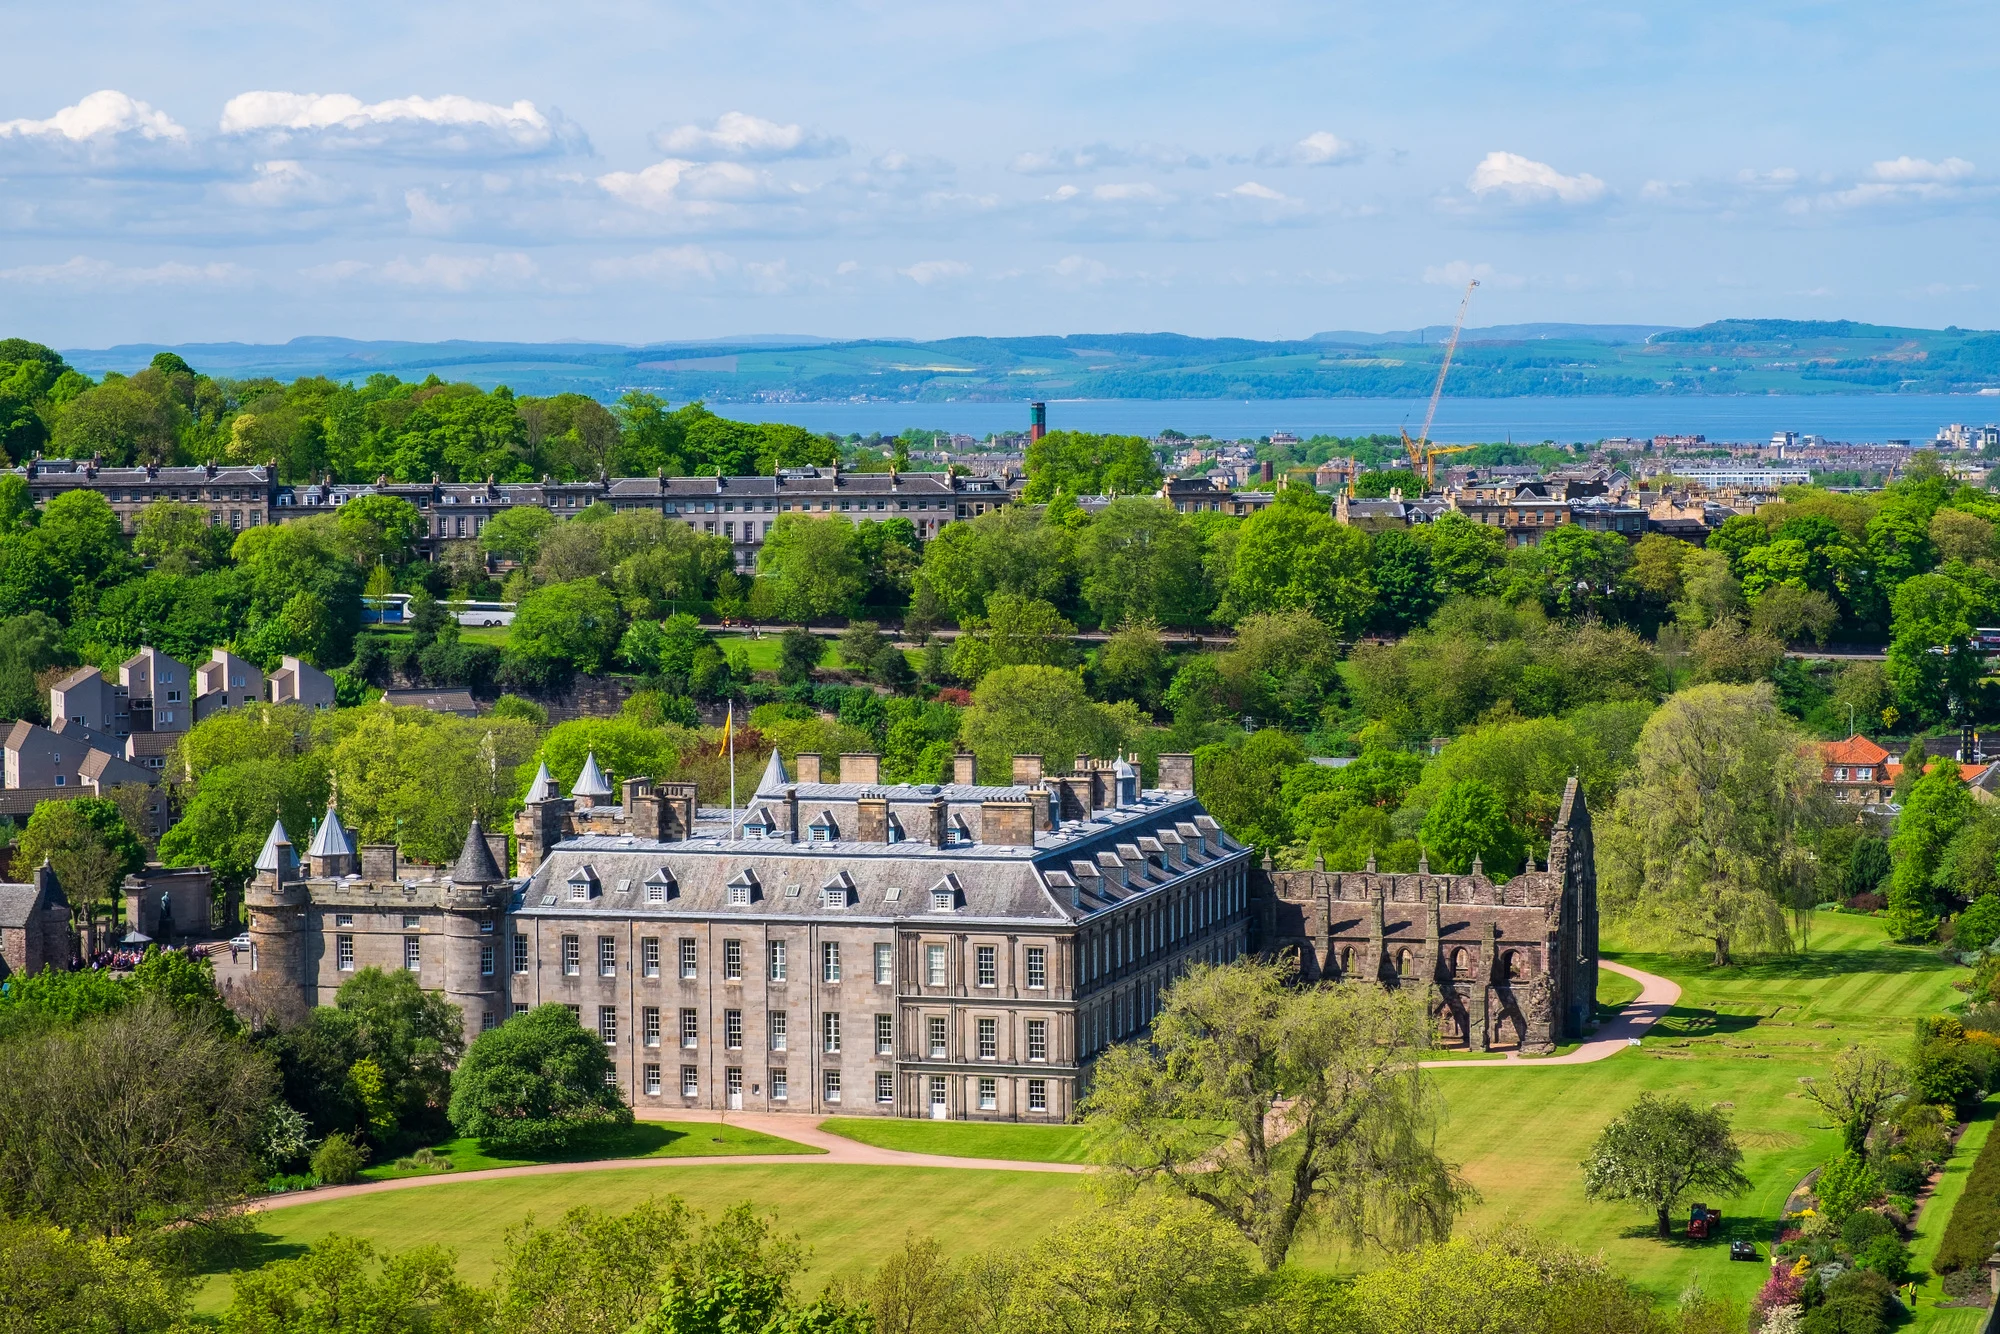 View,to,edinburgh/scotland,with,the,holyrood,palace,in,the,foreground